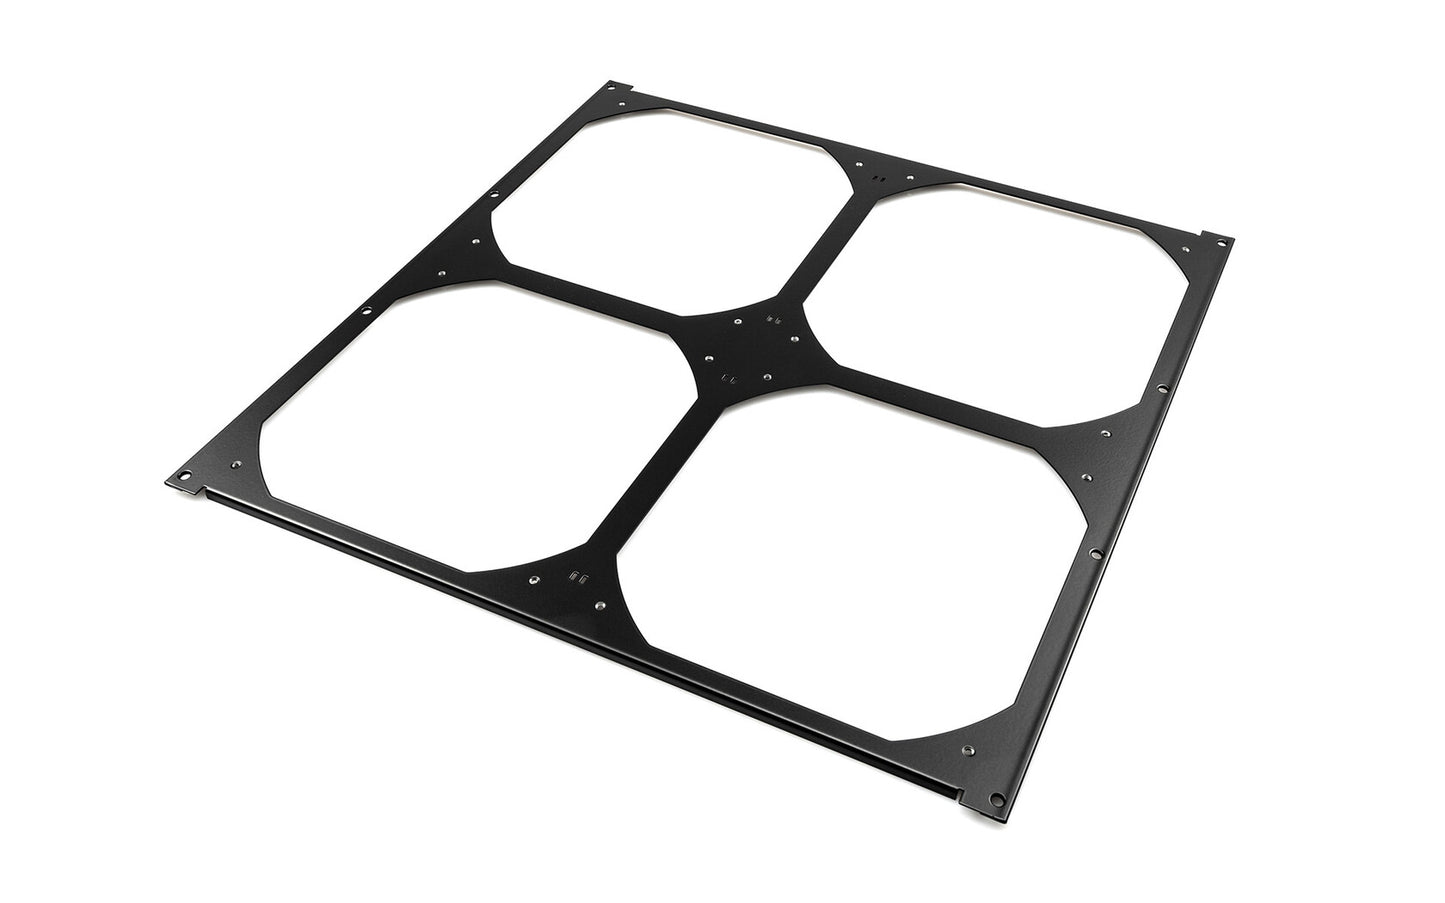 Watercool MO-RA3 420 Mounting Bracket for Noctua NF-A20